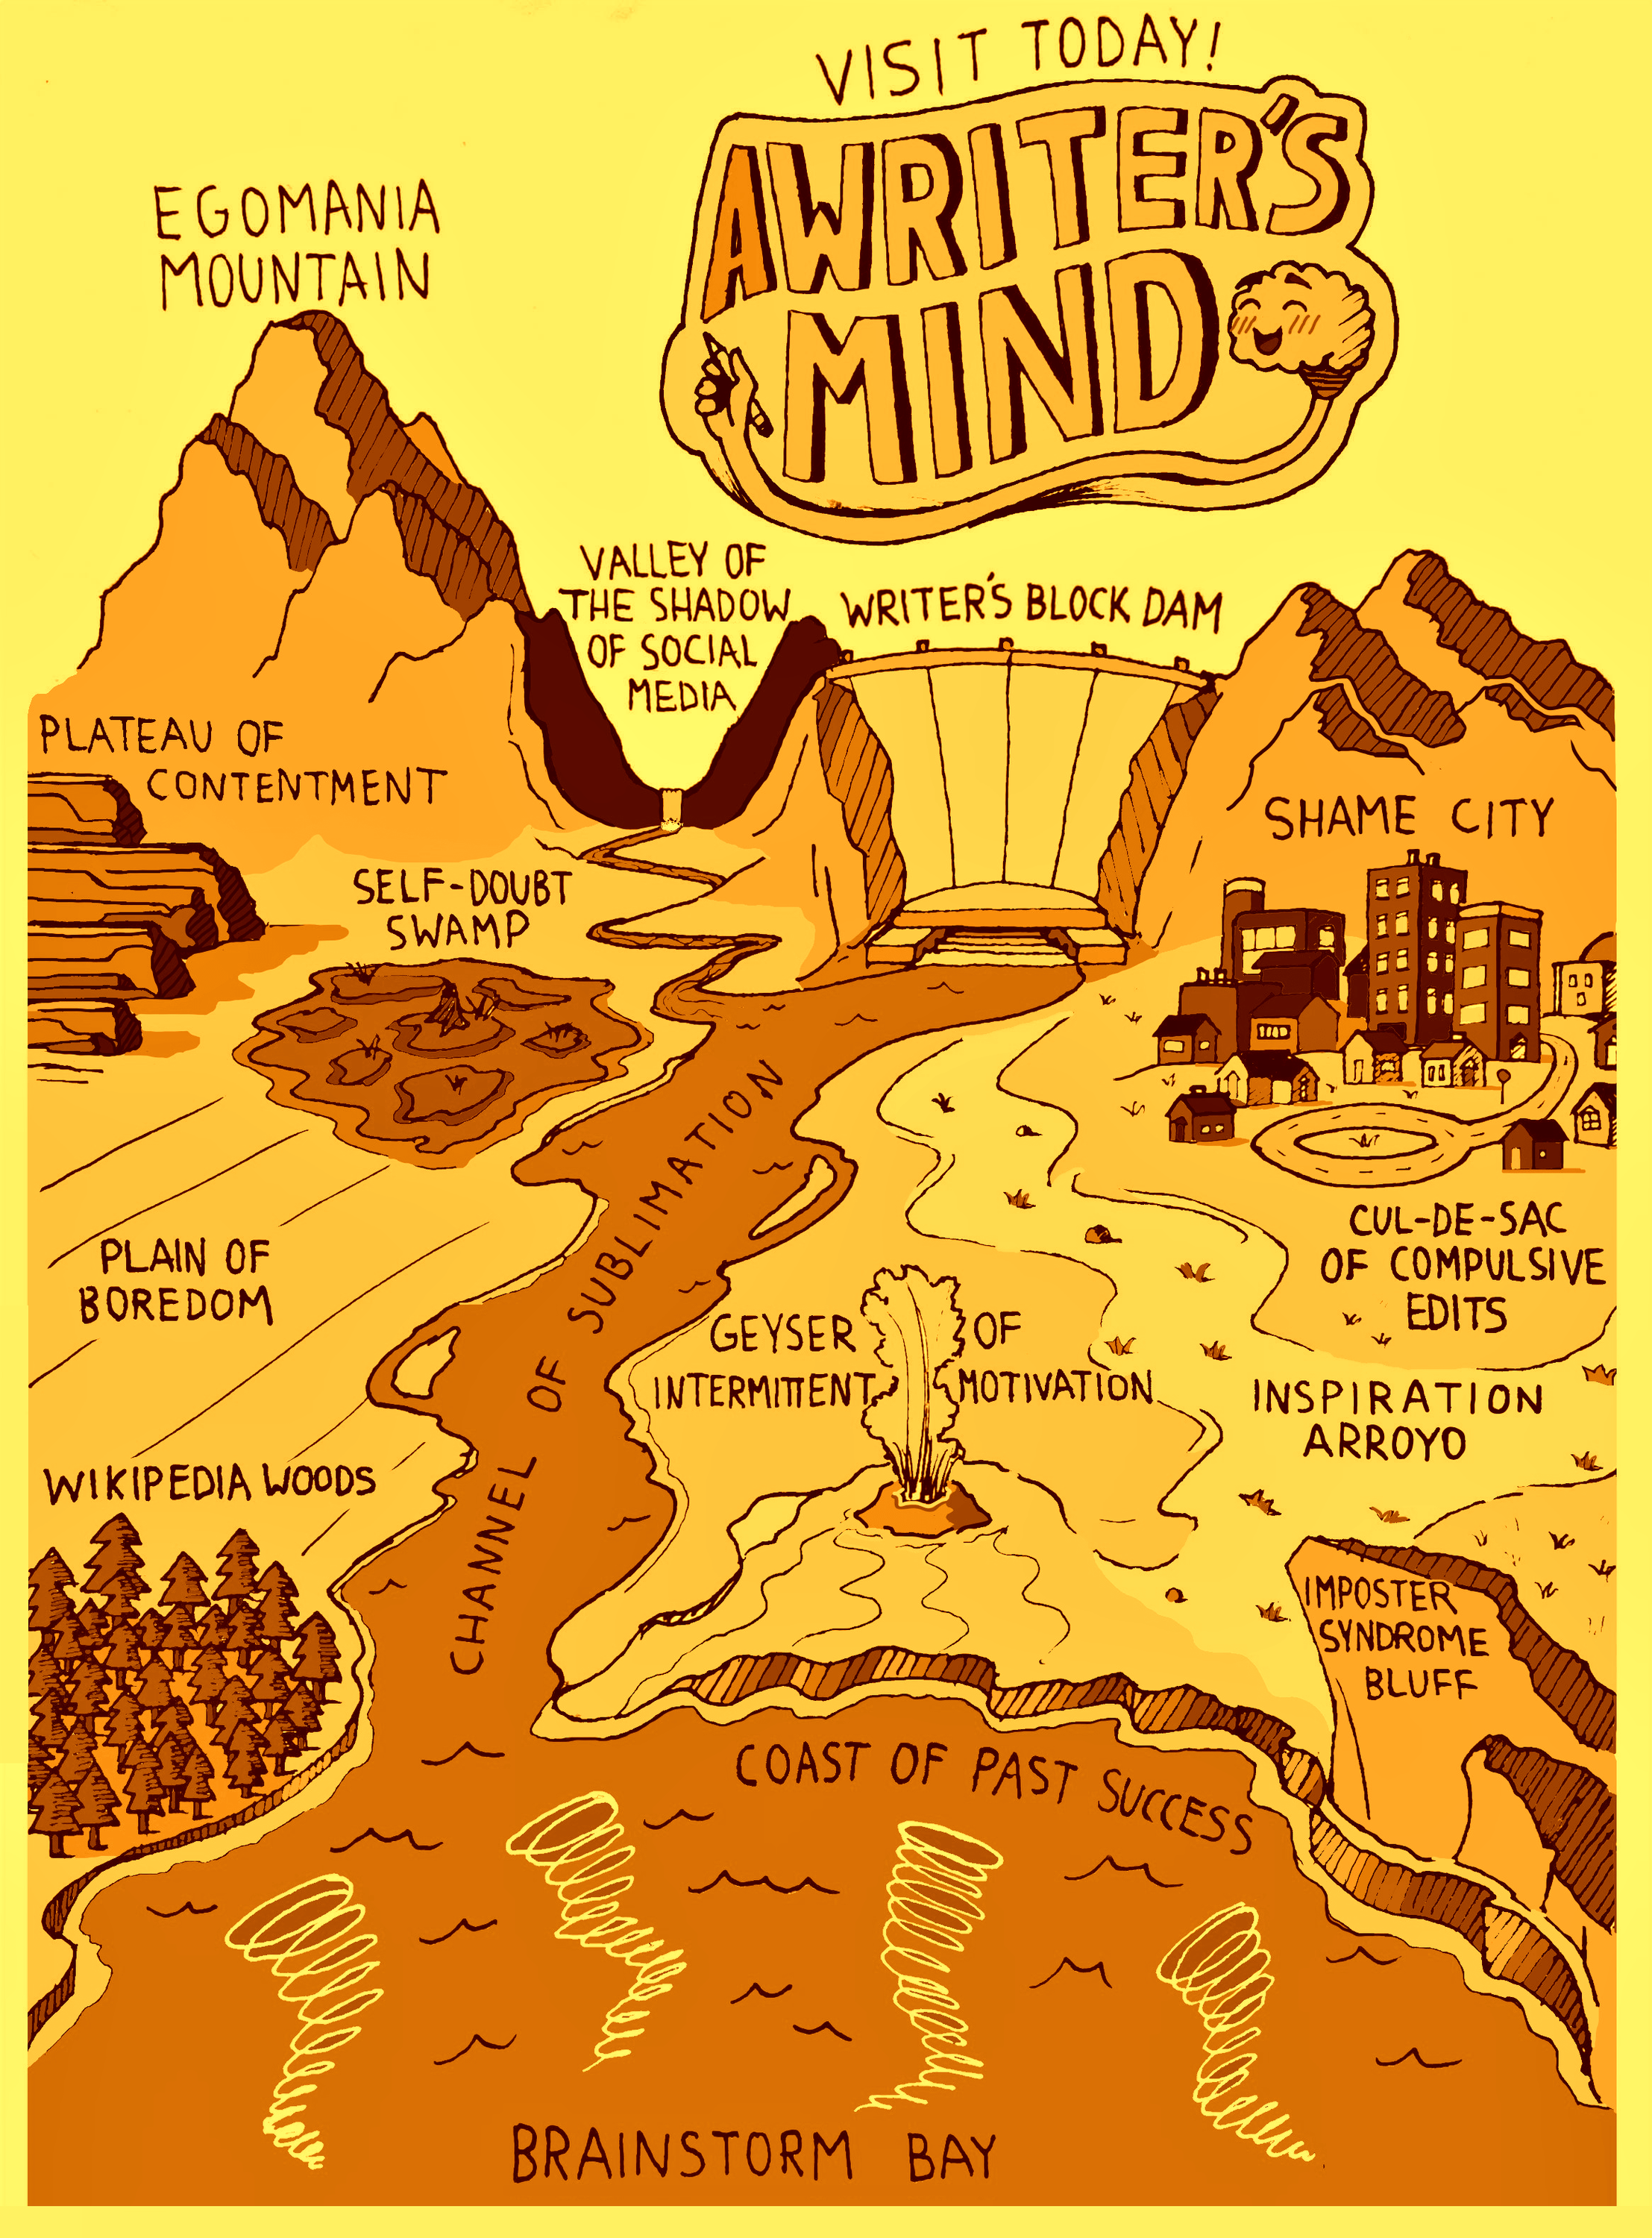 map of a writer's mind